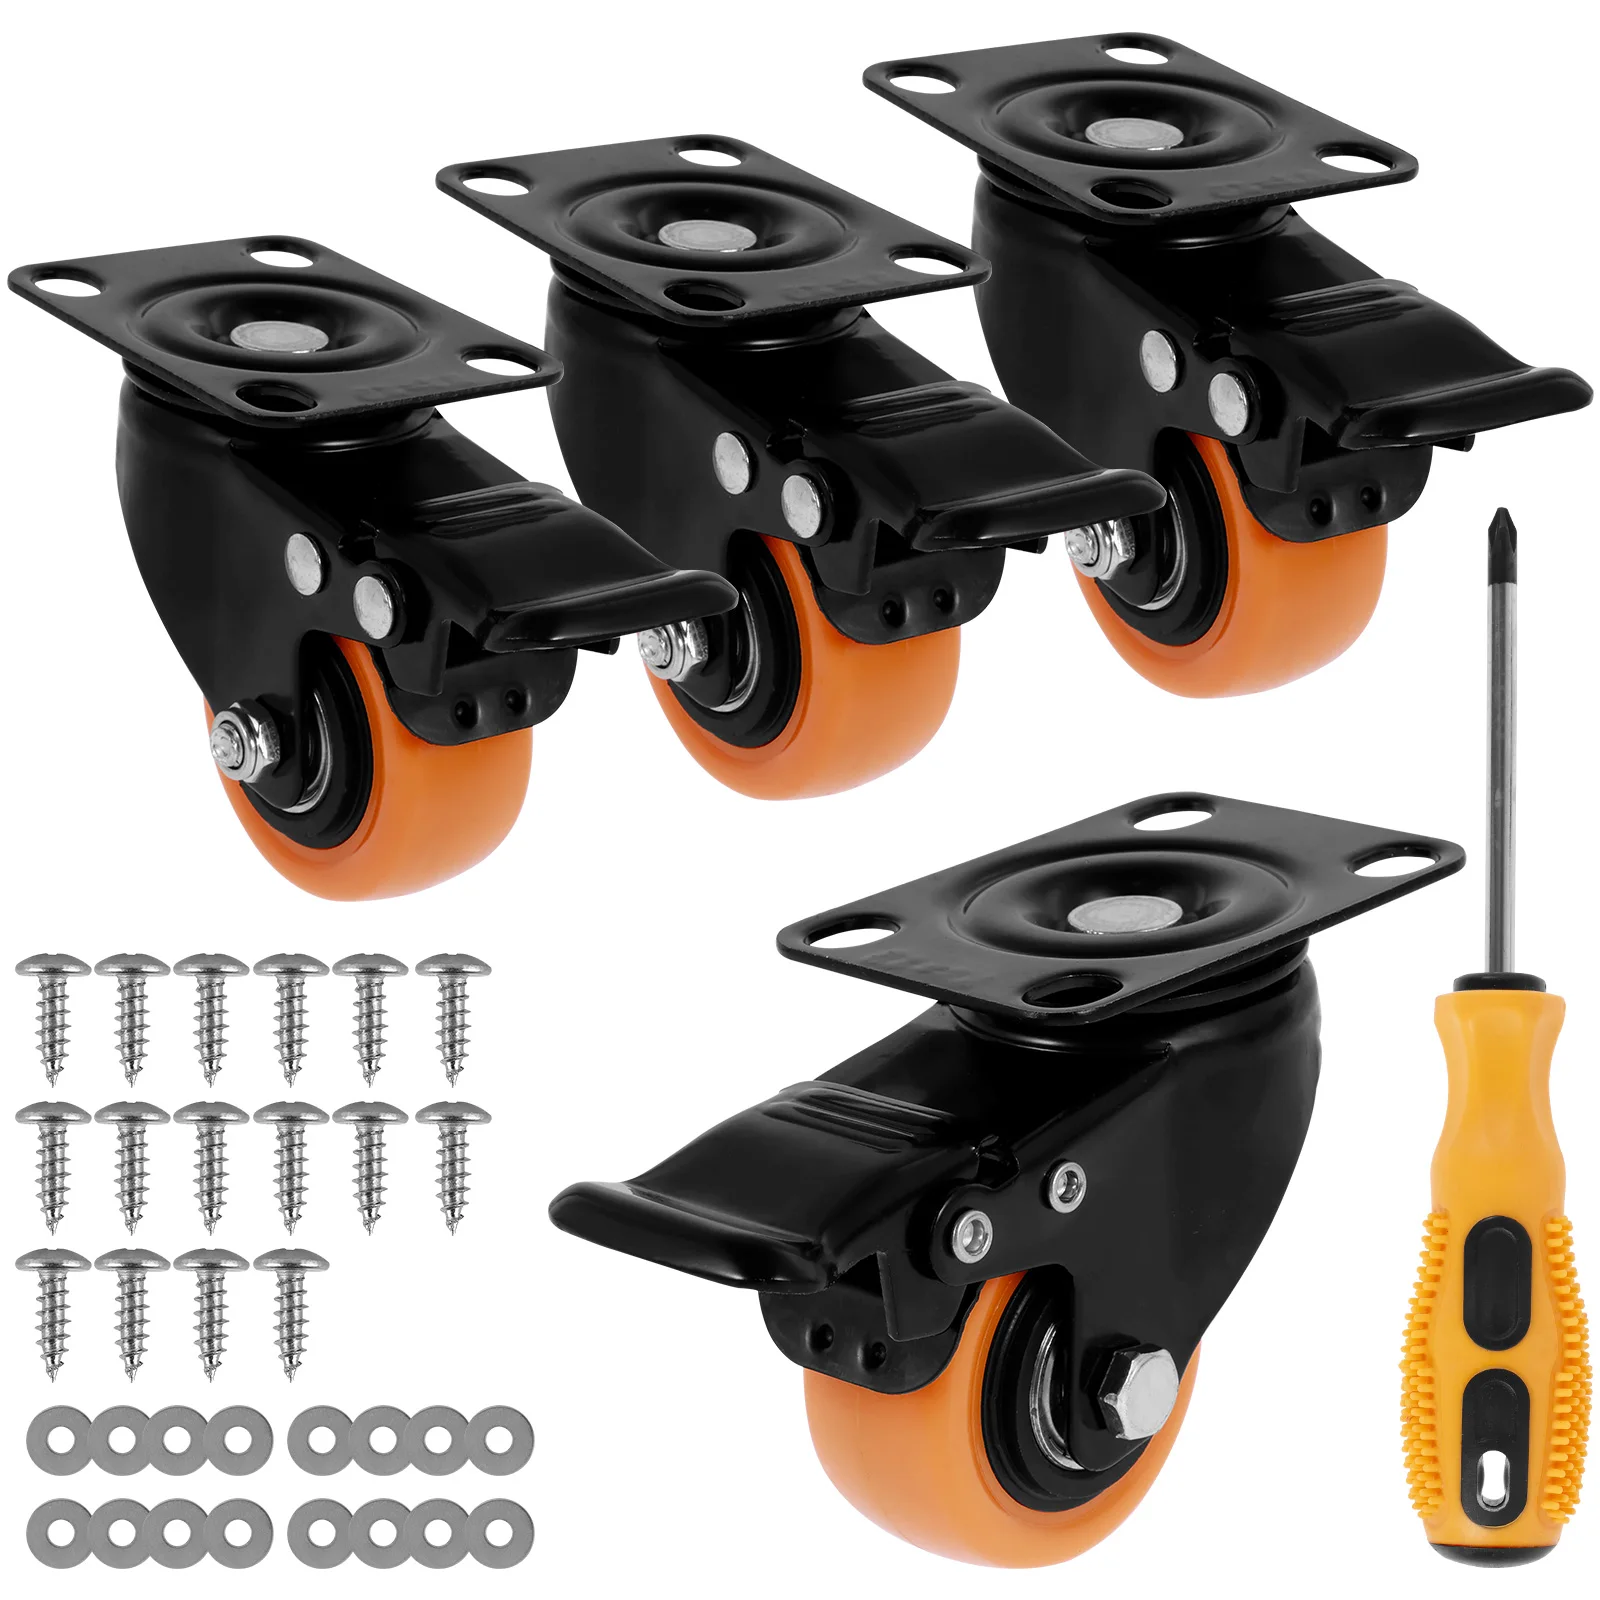 

4Pcs Caster Wheels 2inch Heavy Duty Casters with Brake and Screwdriver 360 Degree Swivel Quiet Trolley Furniture Caster Up to